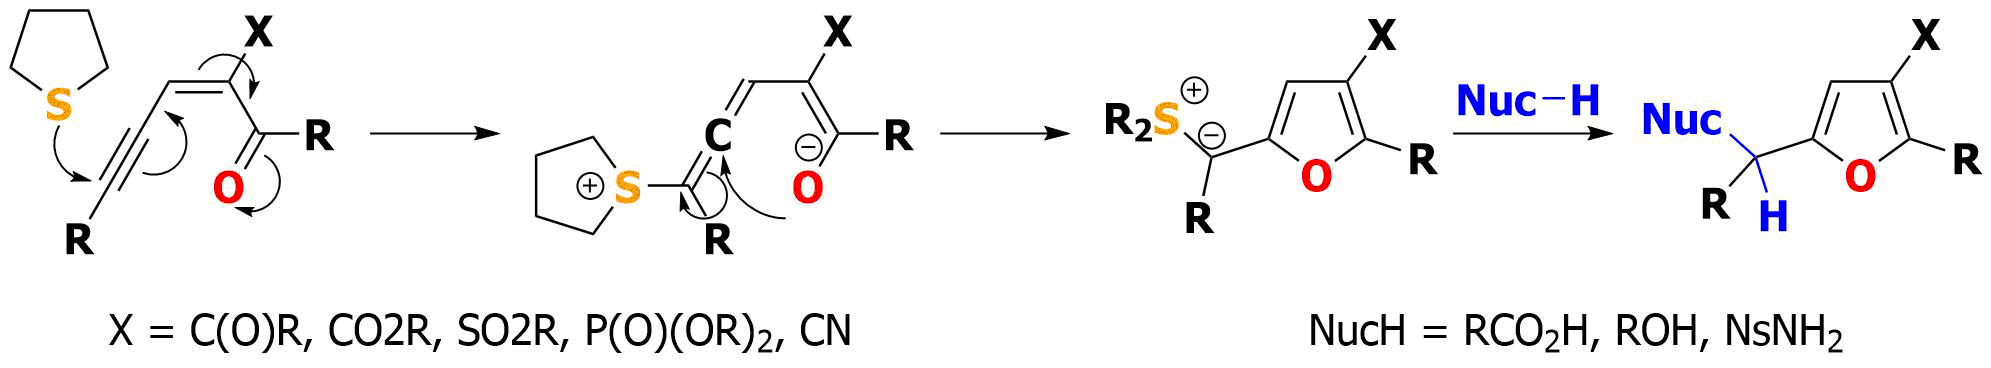 Abstract image for Organocatalytic Synthesis of Highly Substituted Furfuryl Alcohols and Amines